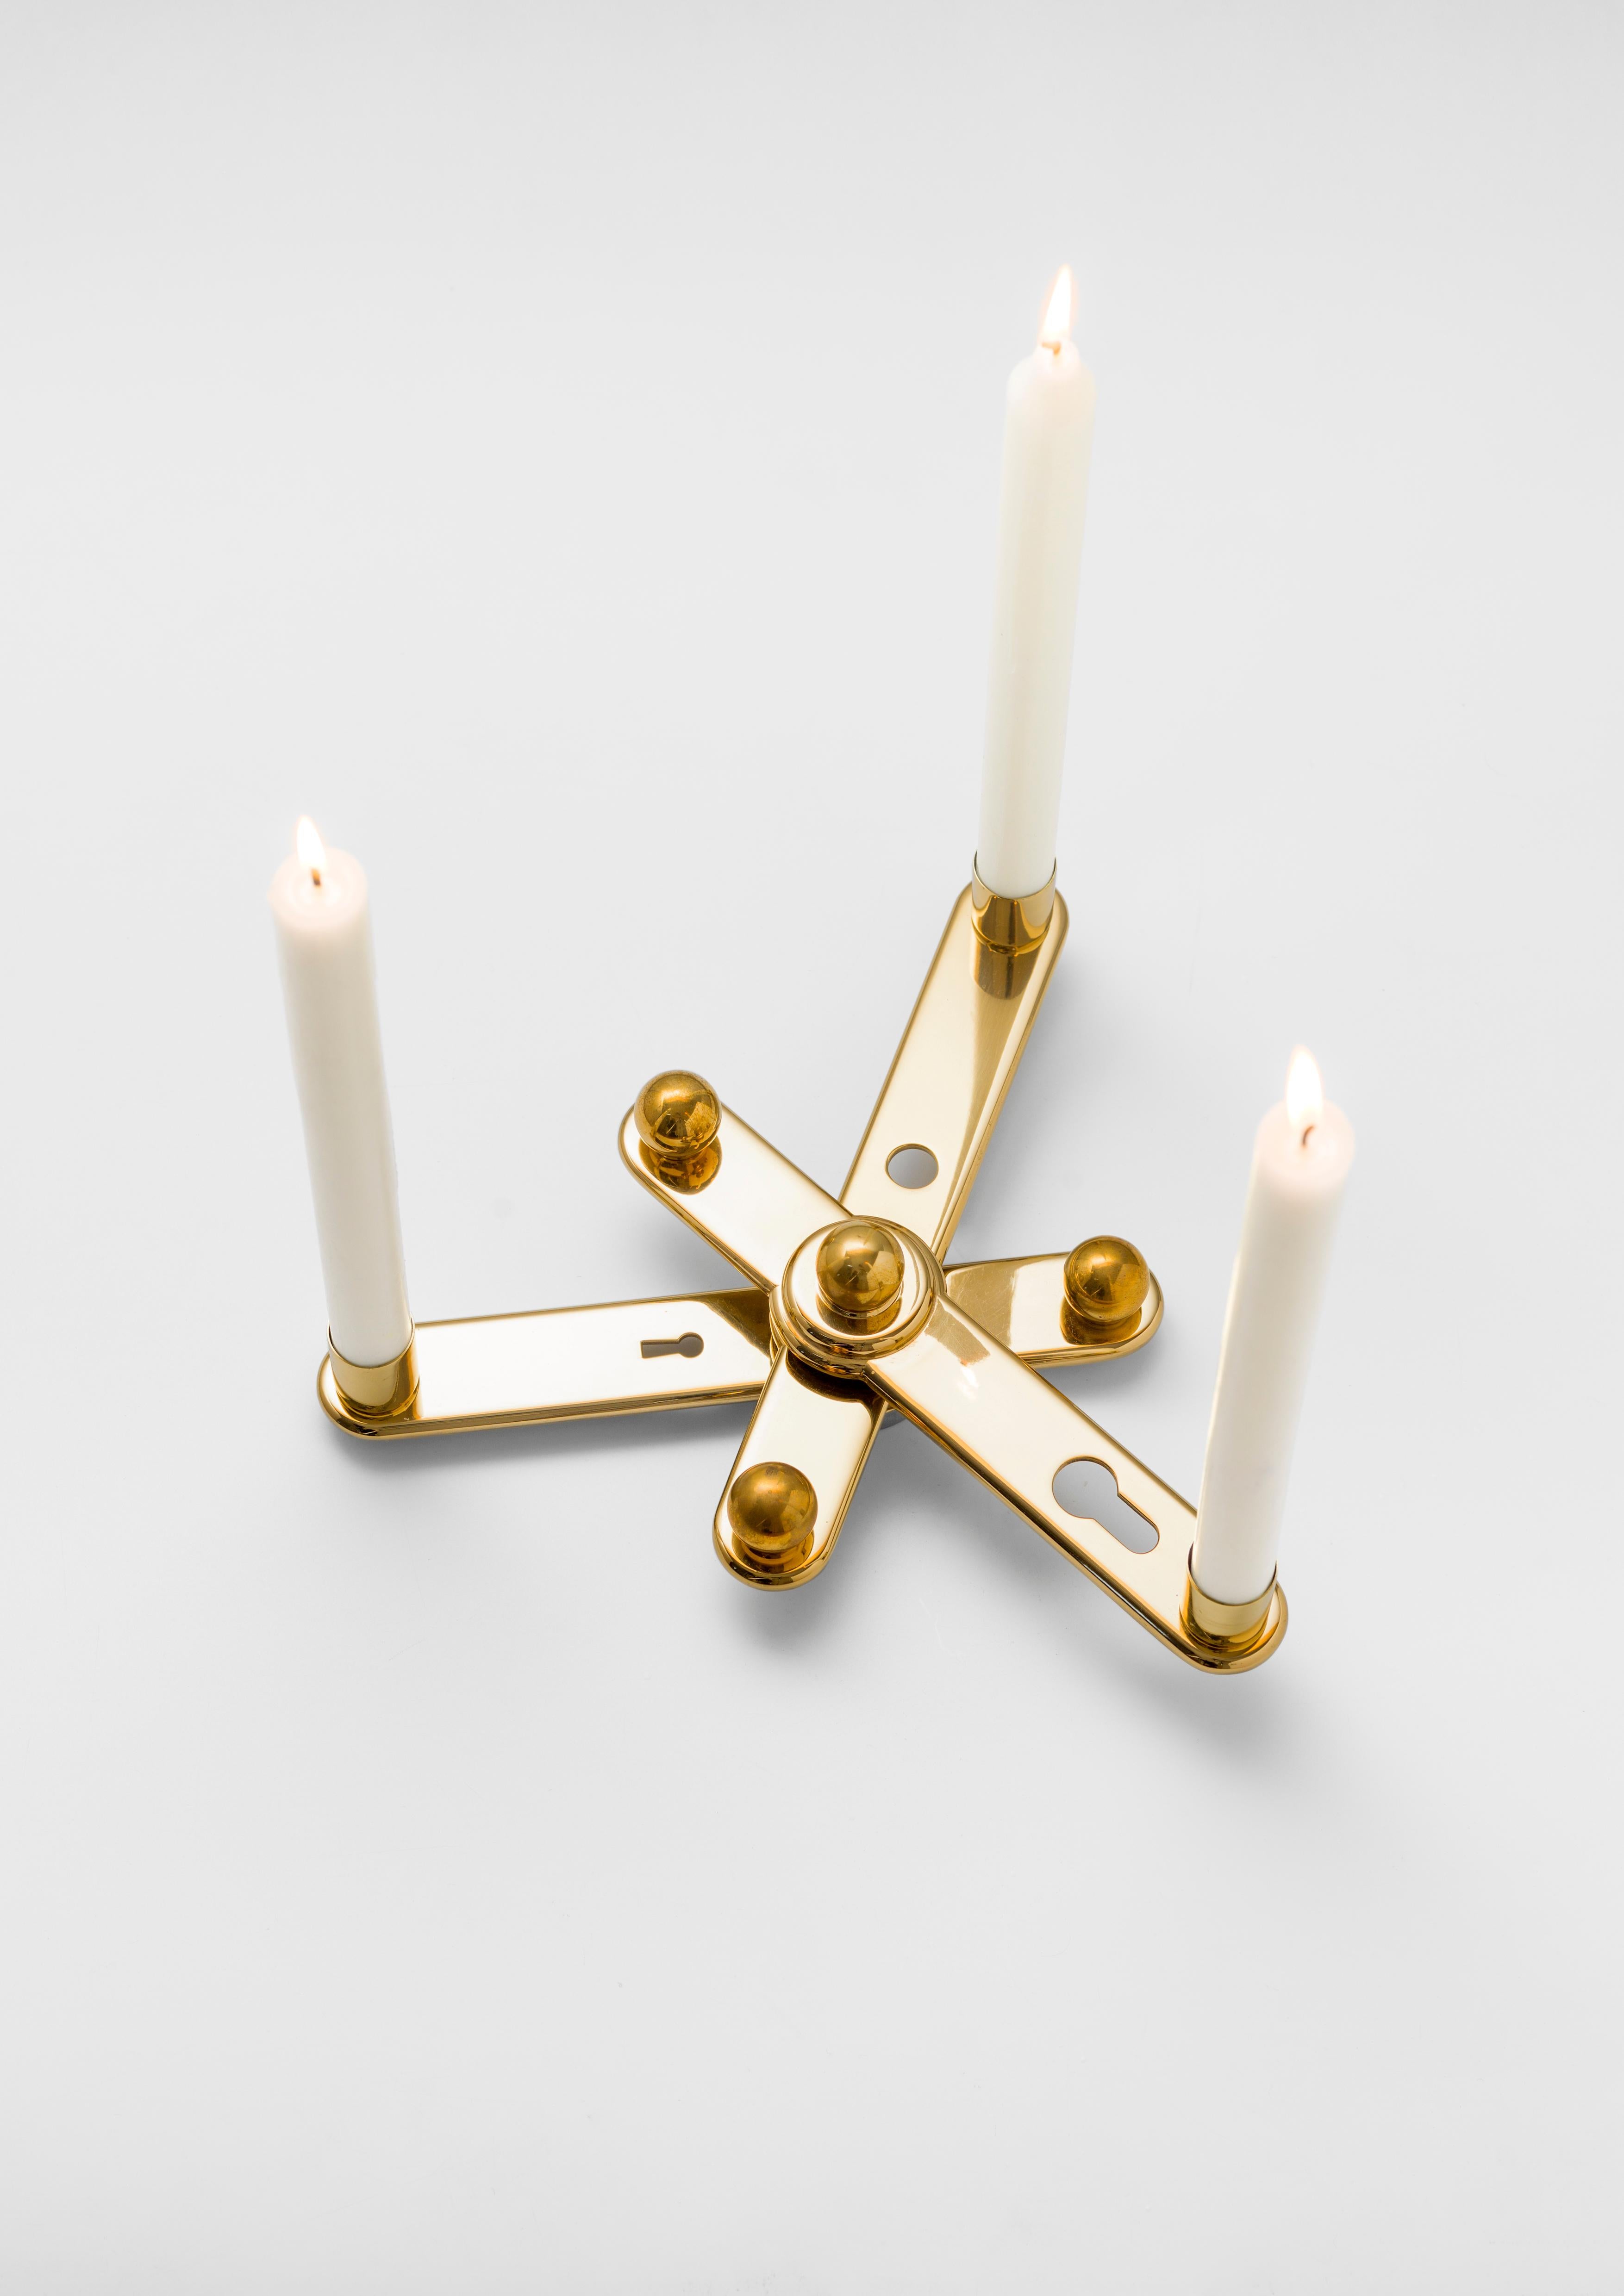 Candleholder in polished varnished brass limited edition of 75 designed by Curro Claret for BD Barcelona.

Dimensions: cm 28 x 28 x 9 H.

Remix project Vol.1 & Vol.2.